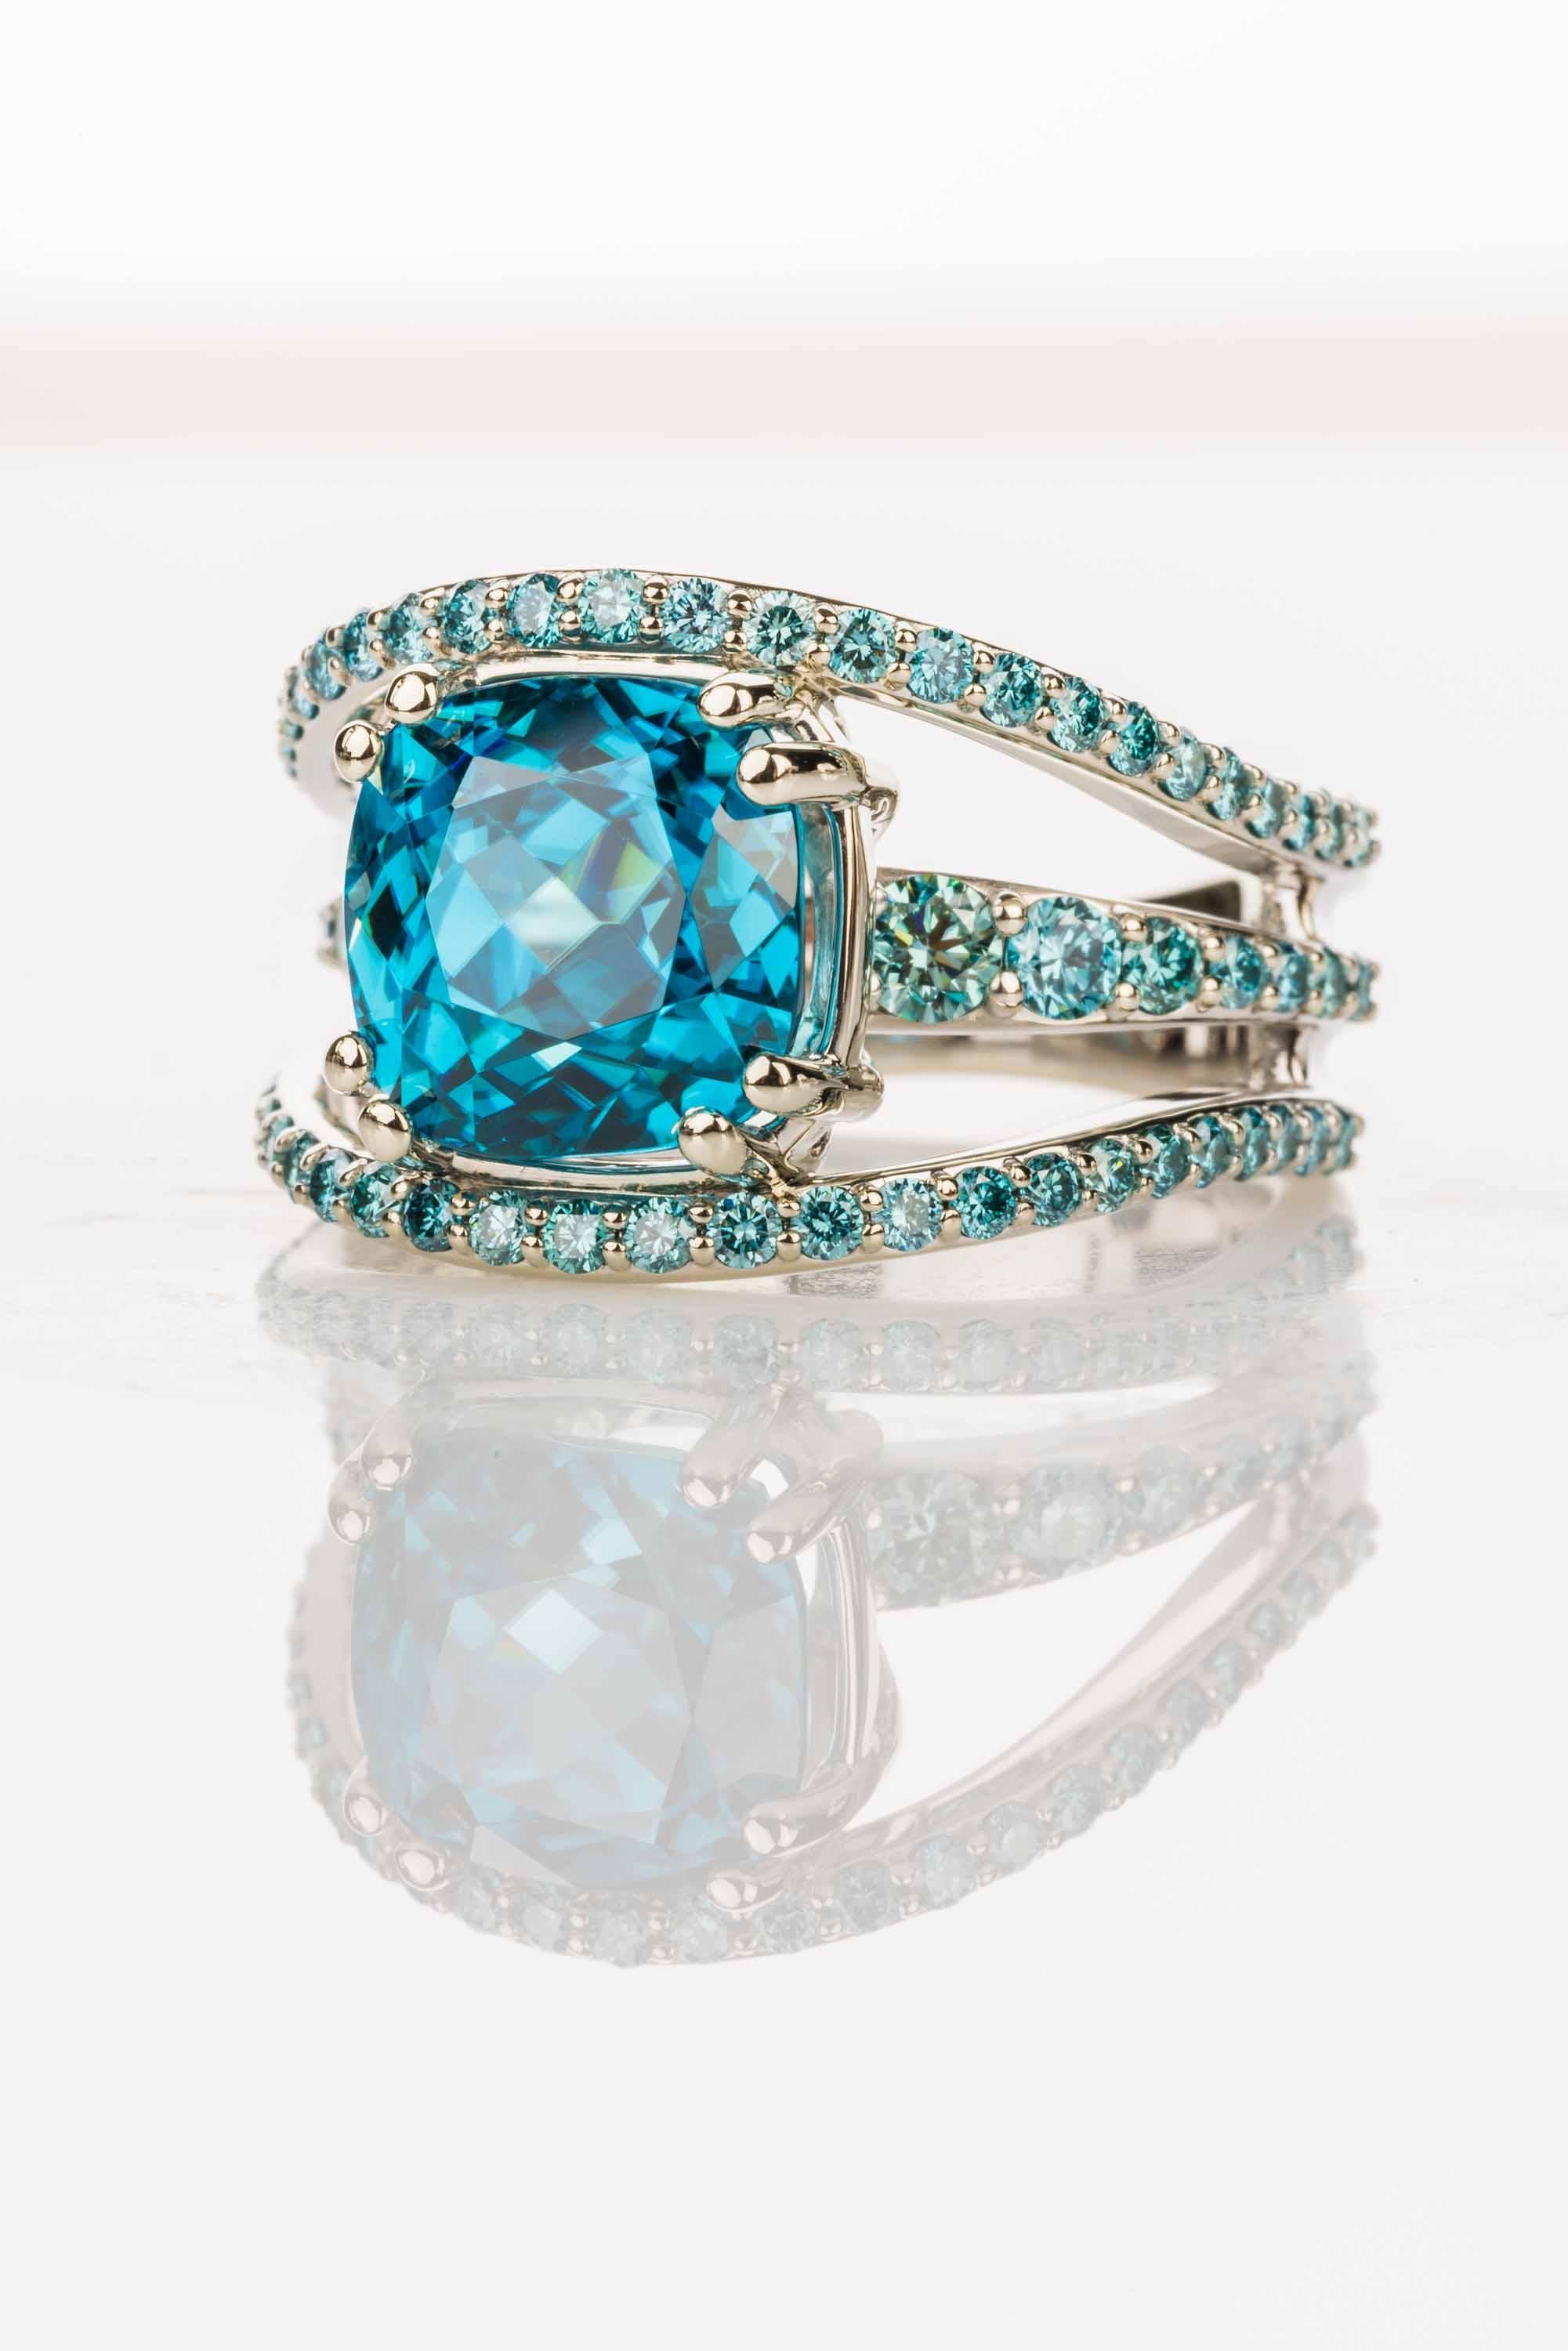 An 18k white gold ring set with a 7.65 carat cushion cut blue zircon and 1.2 total carat weight bead set round blue diamonds, ring size 7. This ring was designed and made by llyn strong.